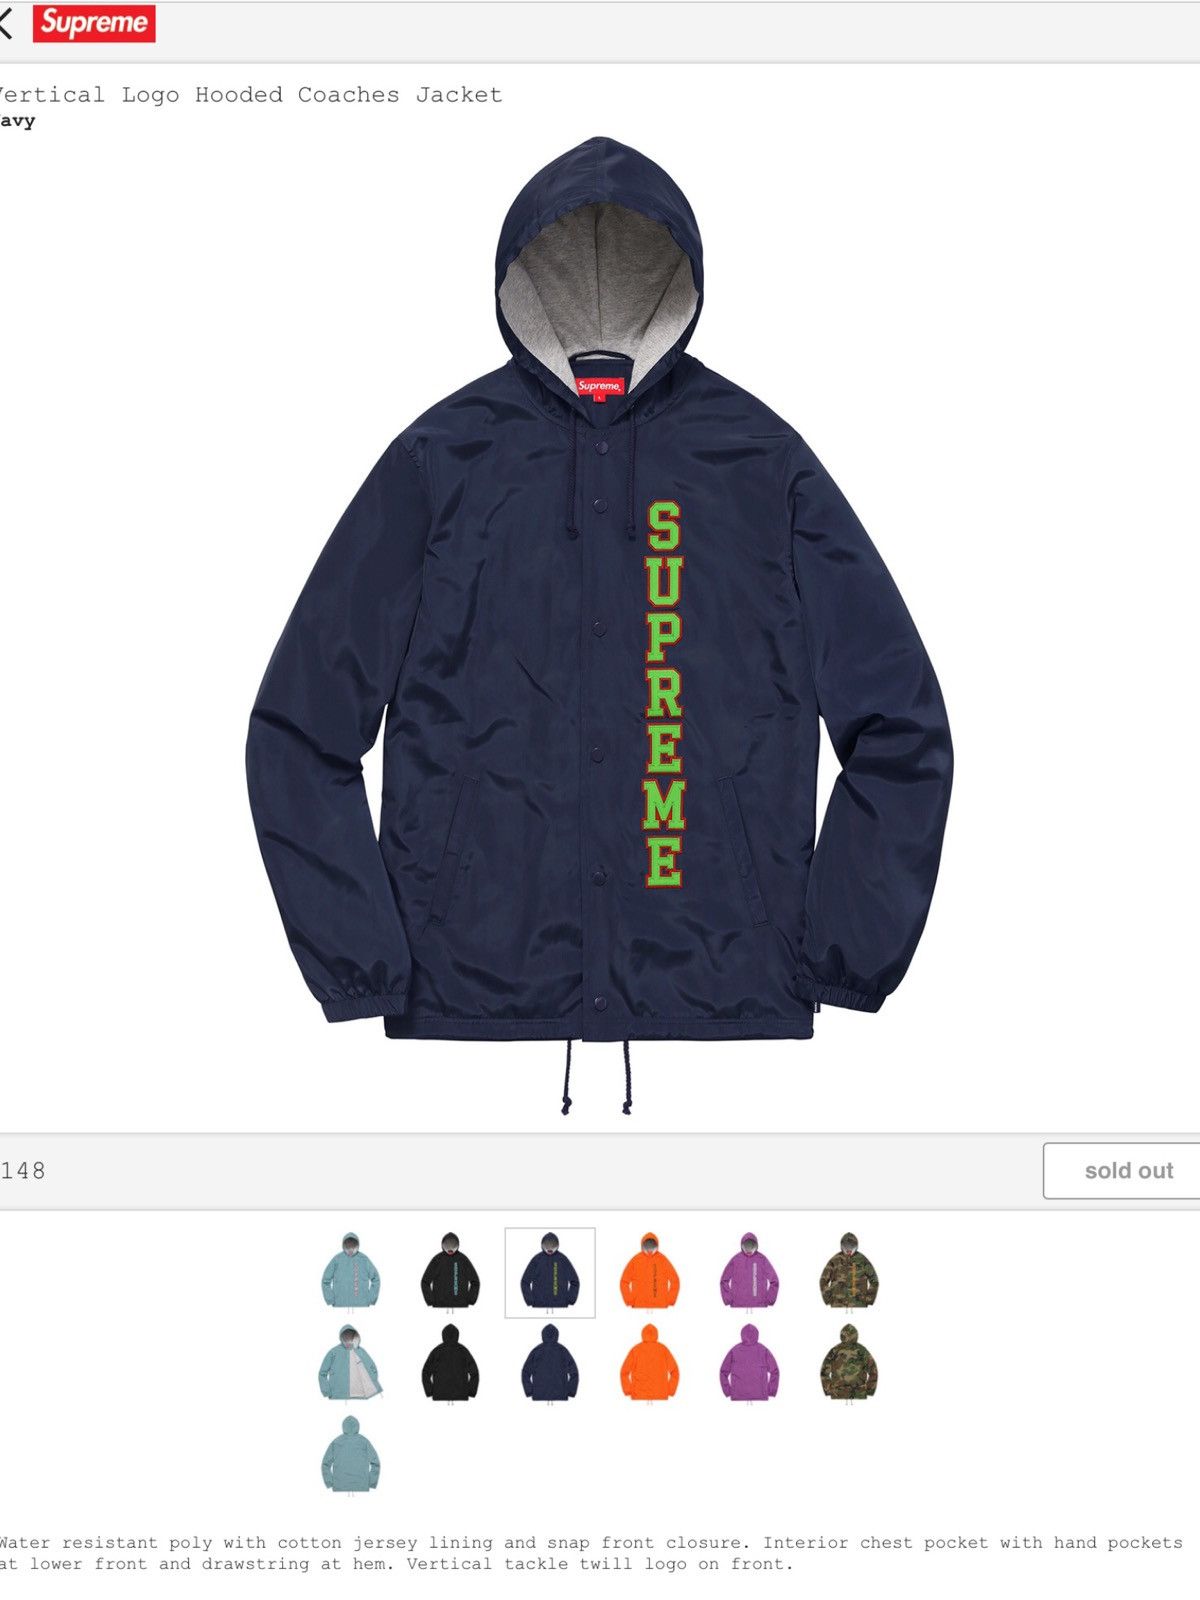 Supreme Vertical Logo Hooded Coaches Jacket | Grailed